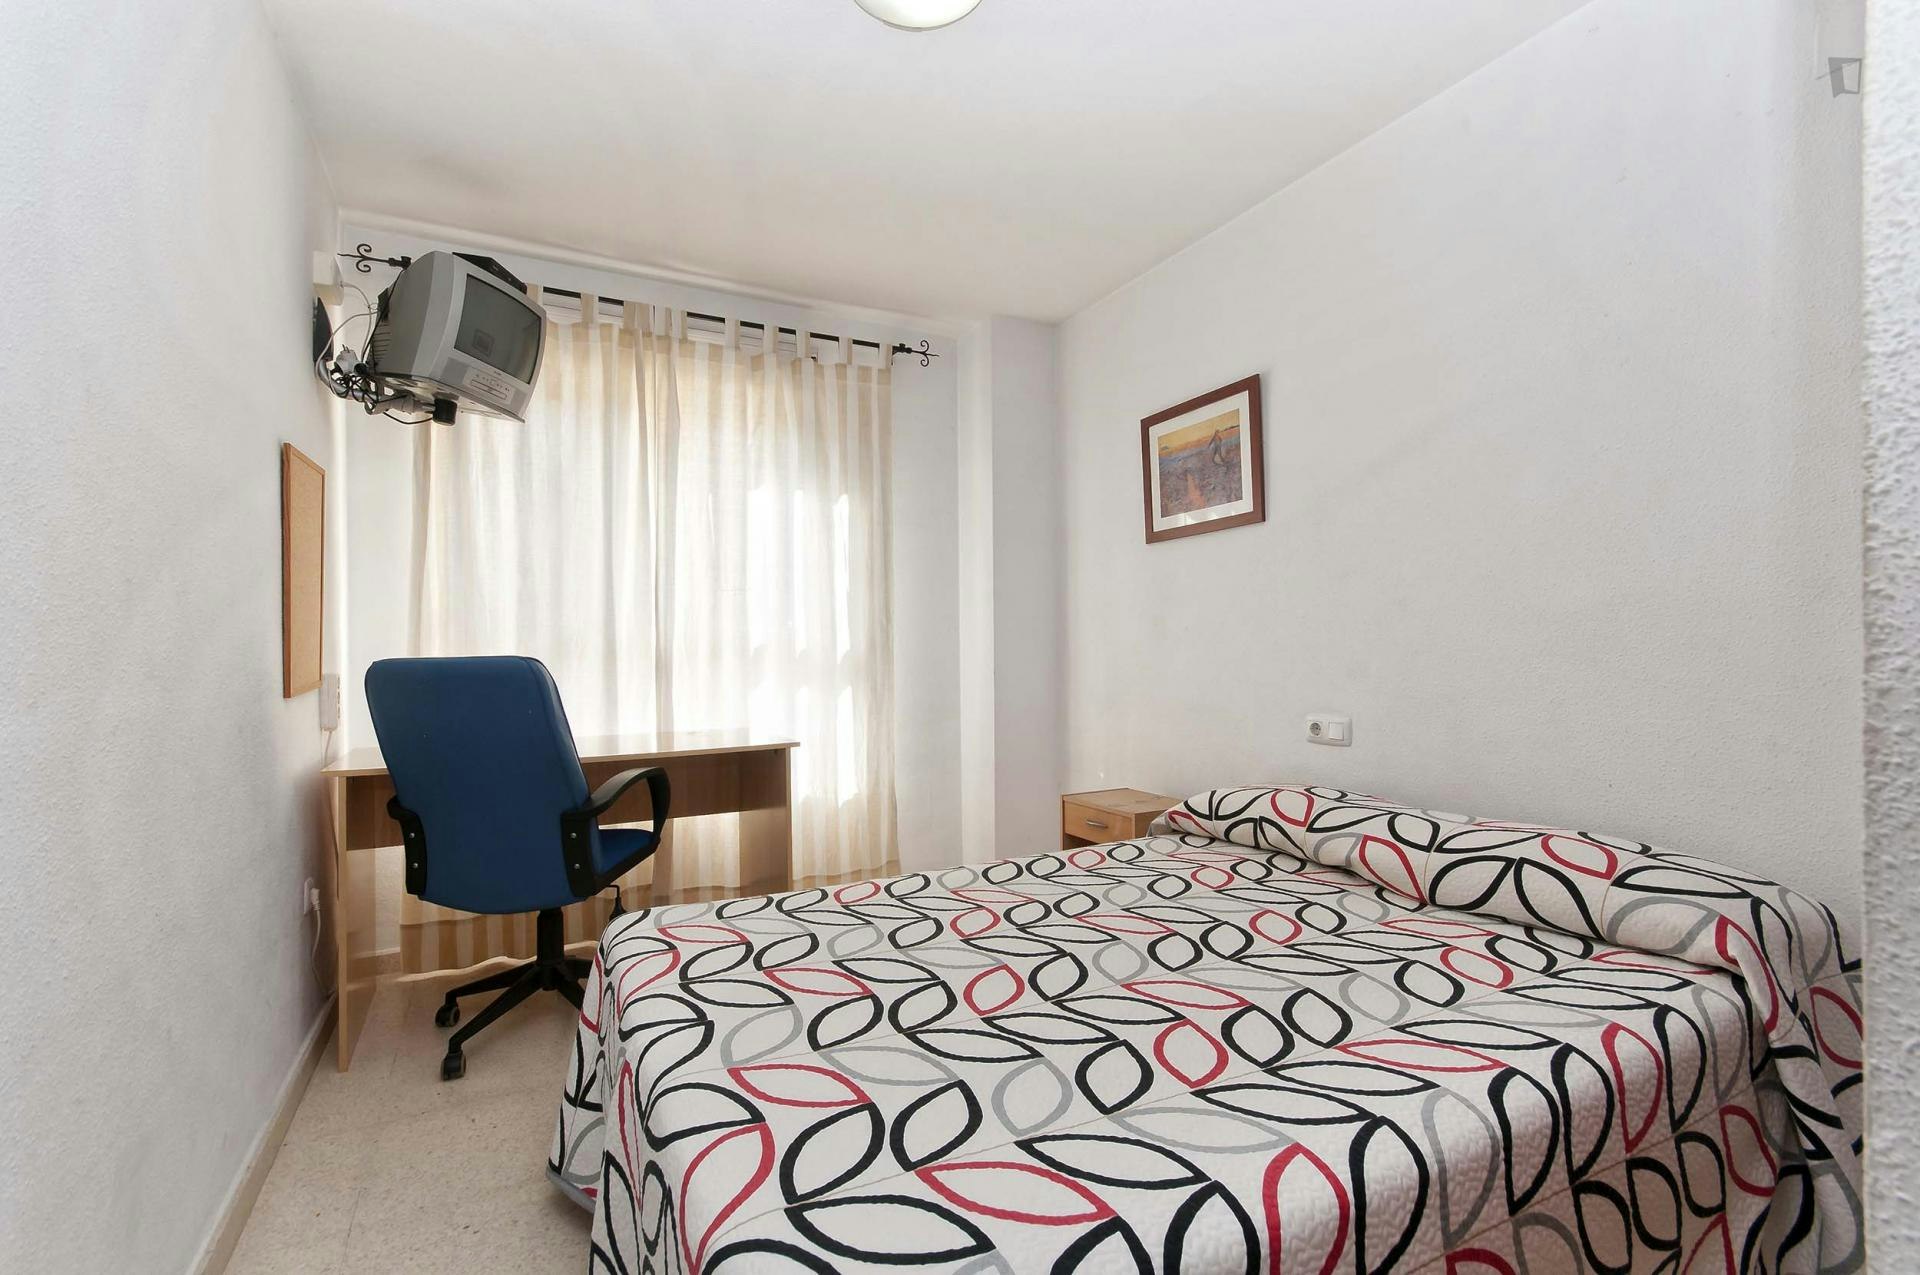 Double bedroom in a 6-bedroom apartment not far from Marq - Castillo train station